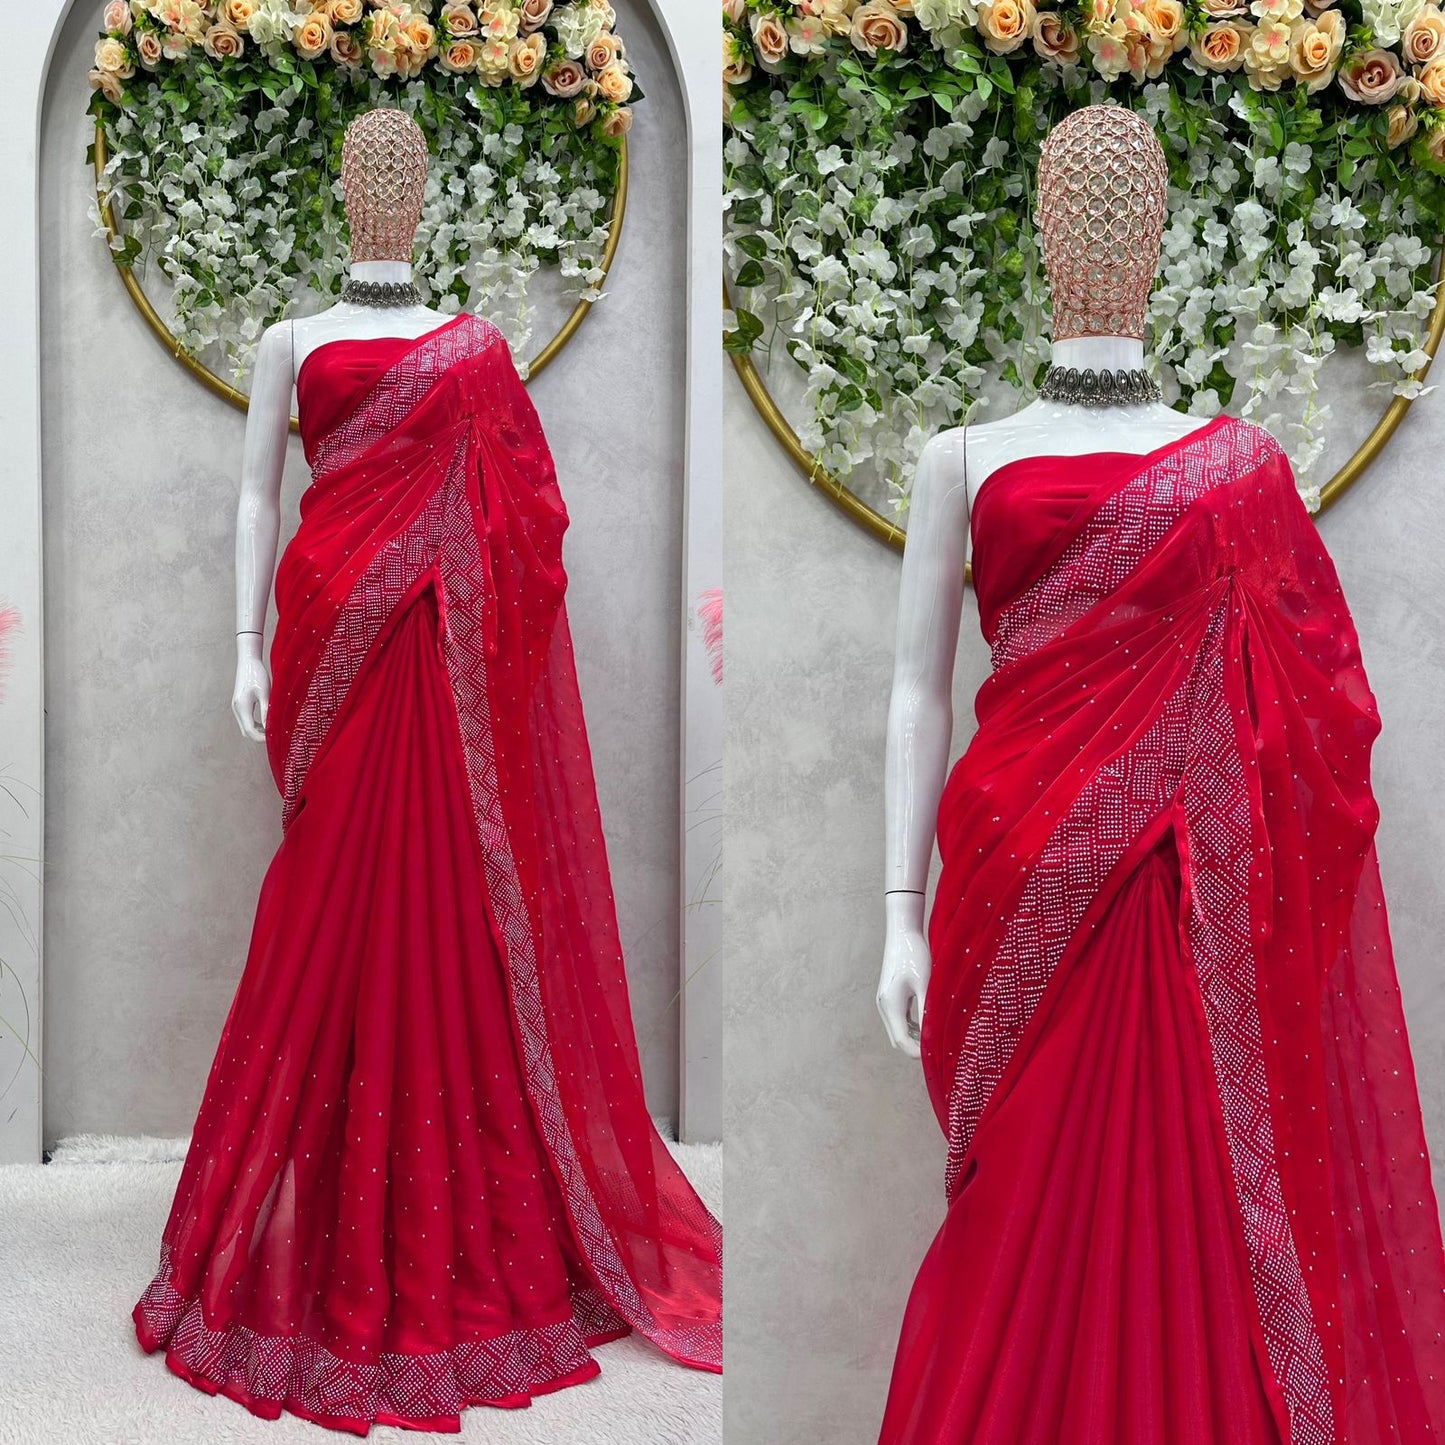 Elevate Your Style with Description Jimmy Choo Saree - Buy Now!